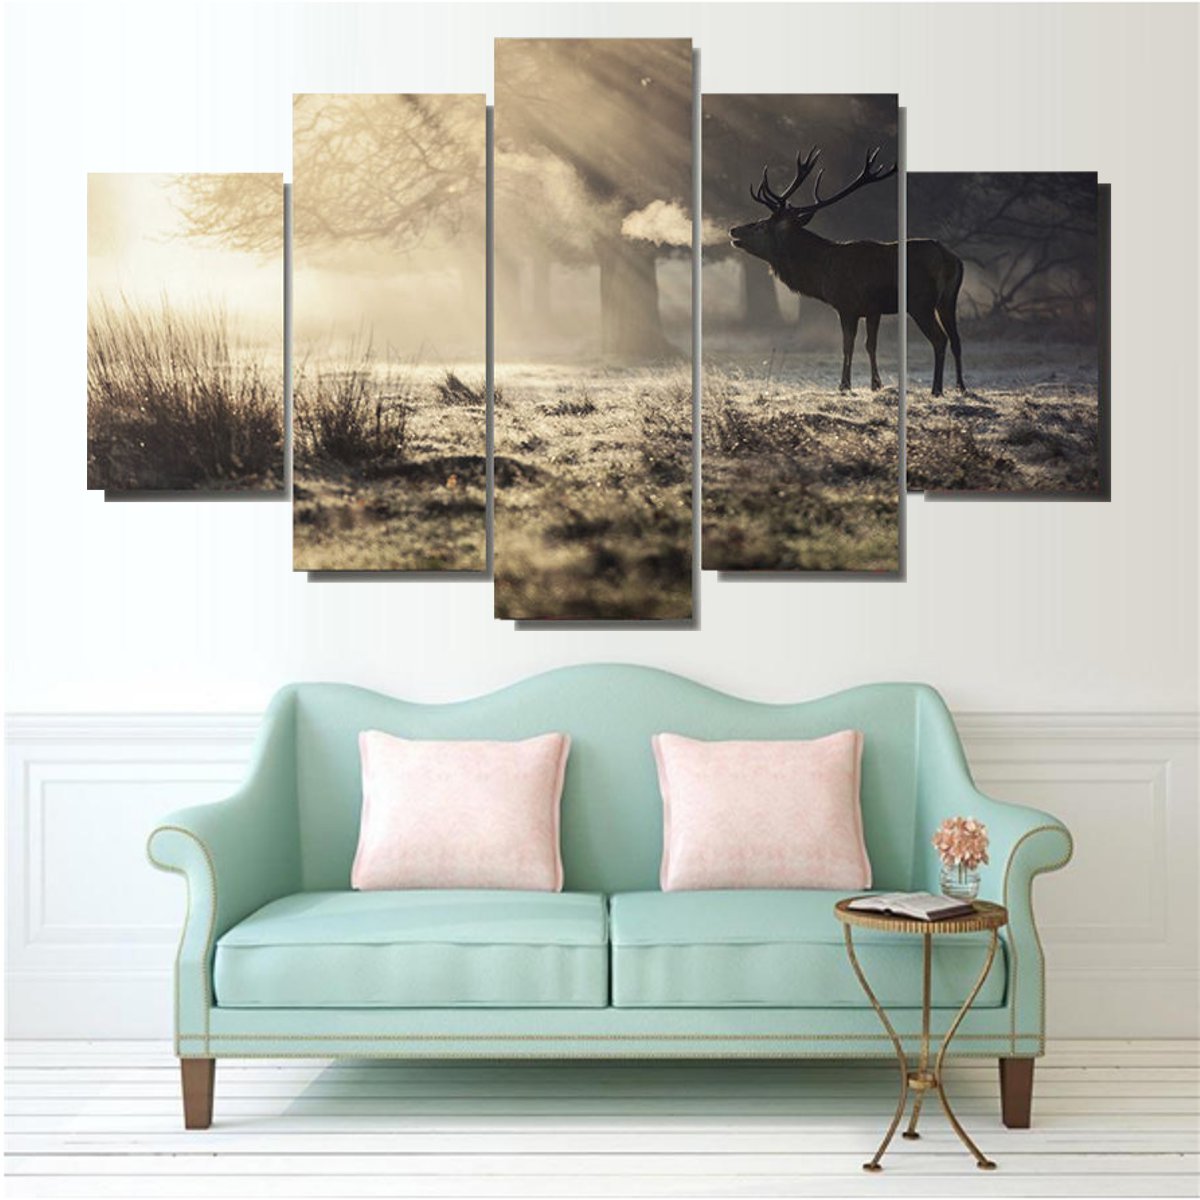 Elk-Art-Oil-Paintings-Modern-Style-Canvas-Print-Wall-Unframed-Pictures-Home-Decor-1636997-2